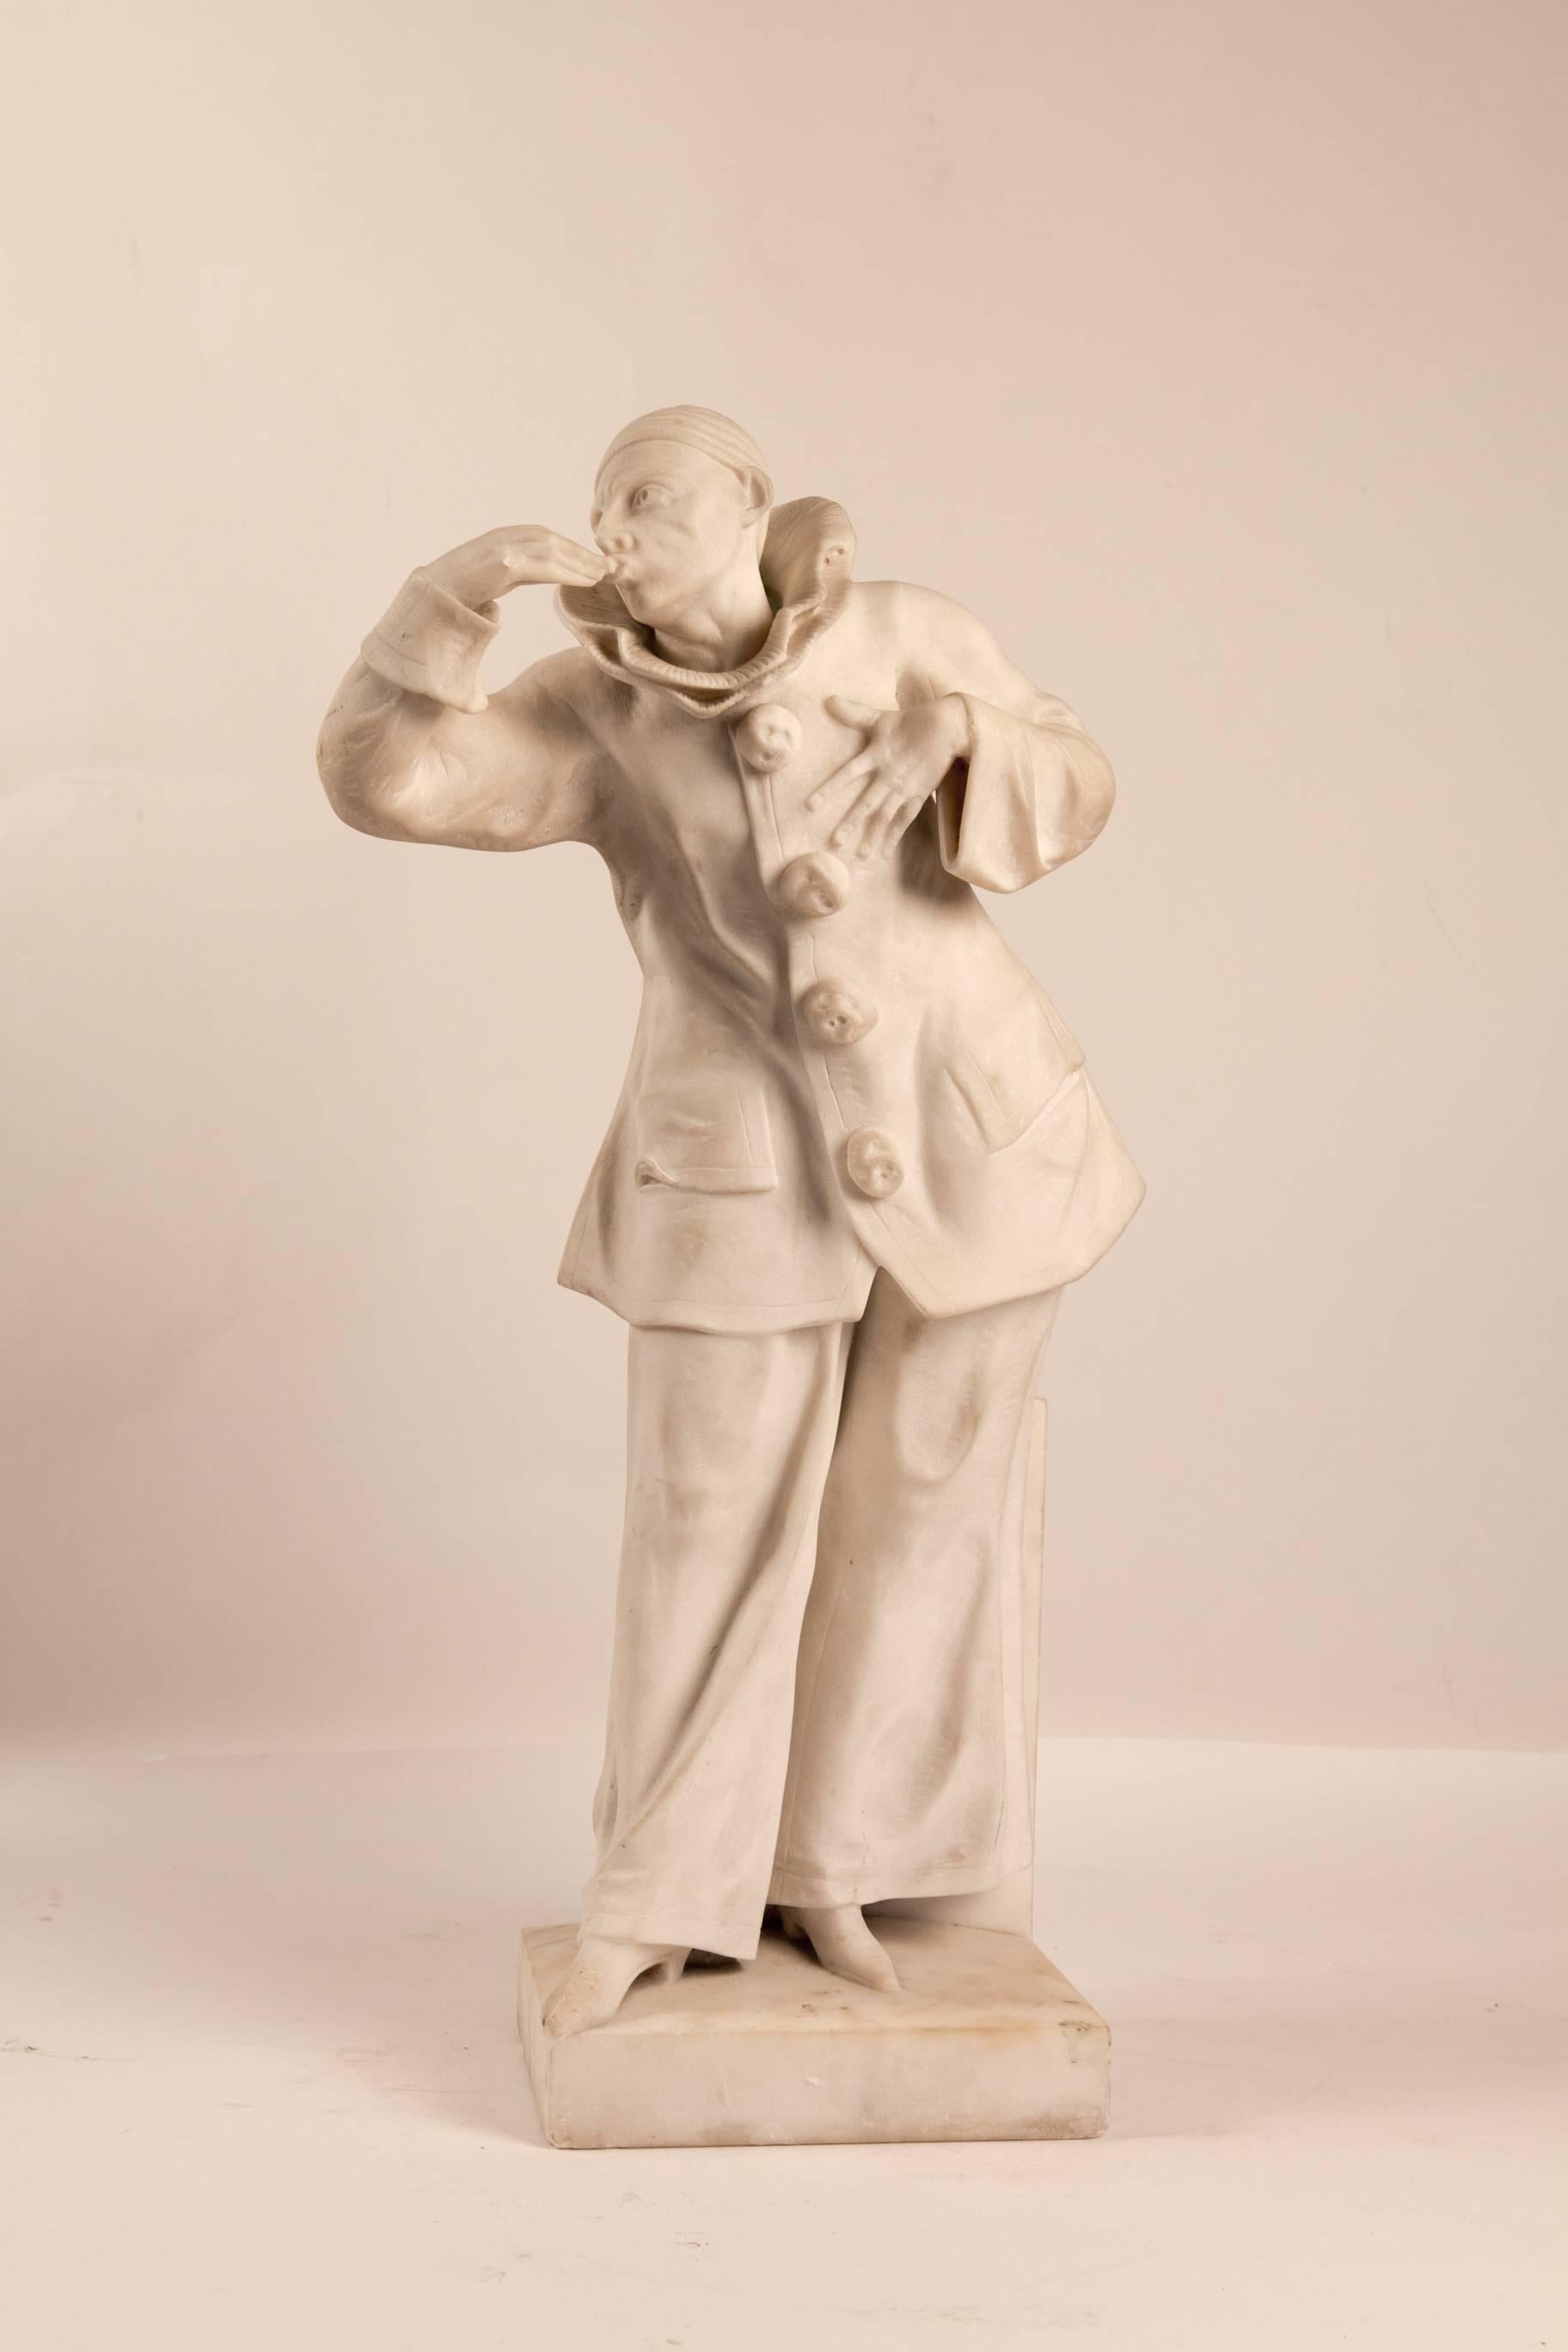 Fine quality hand-carved Carrara marble Pierrot sculpture signed by John Mayne Van Der Kemp. 
Belgium work early 20th century, circa 1920-1930.

Dimensions: 25.19 in H, 13.77 in W, 7.87 in D.